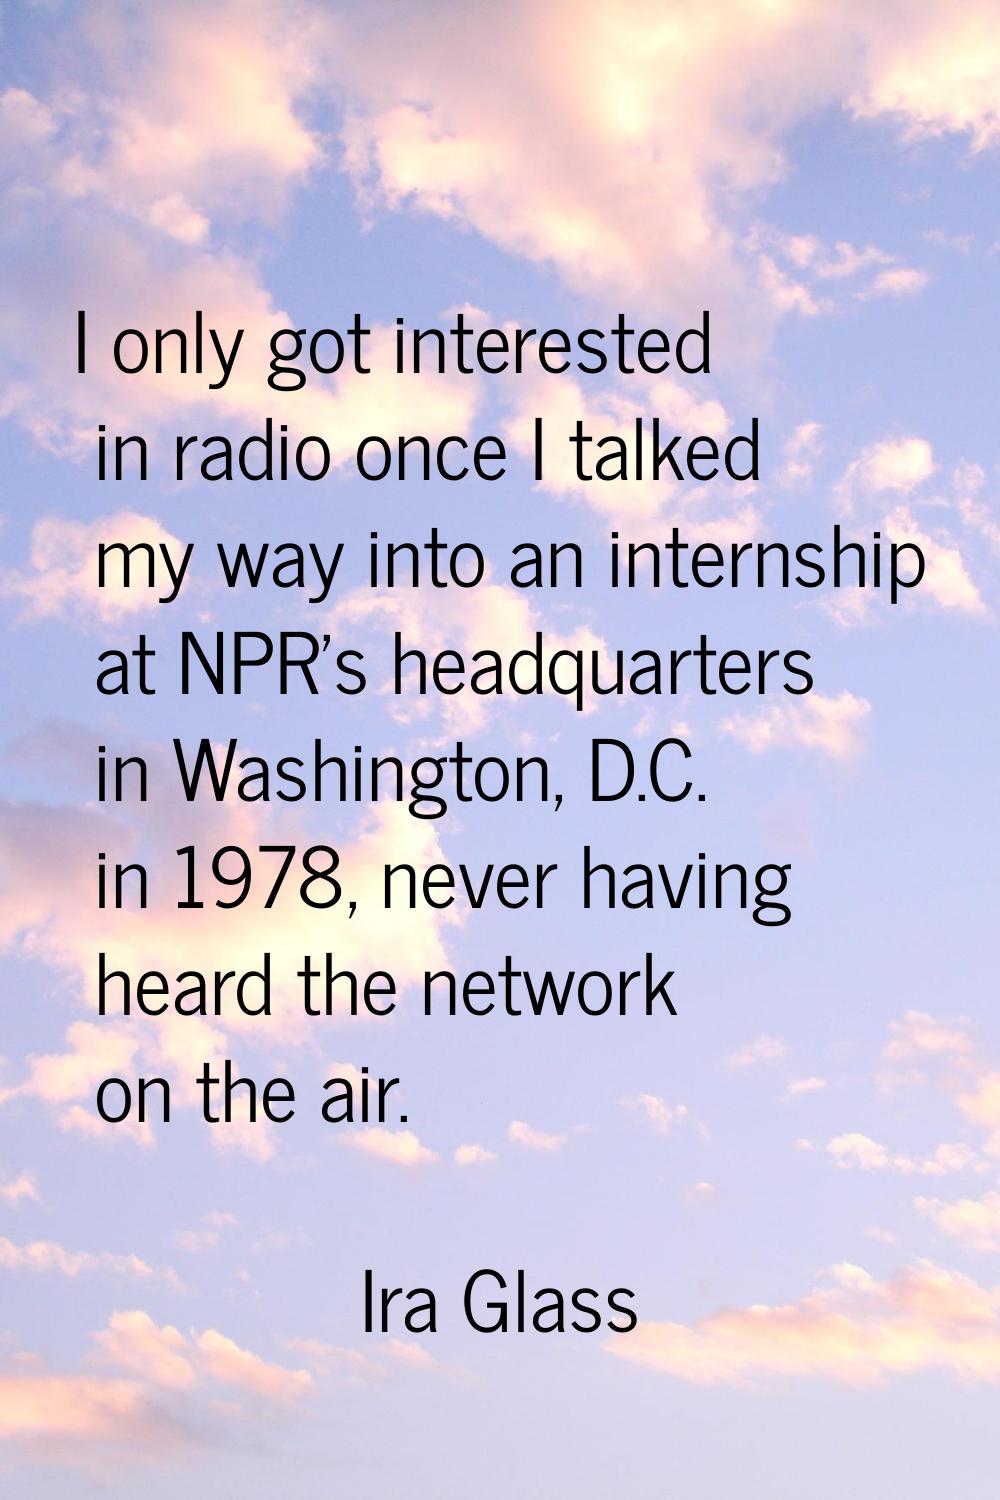 I only got interested in radio once I talked my way into an internship at NPR's headquarters in Was